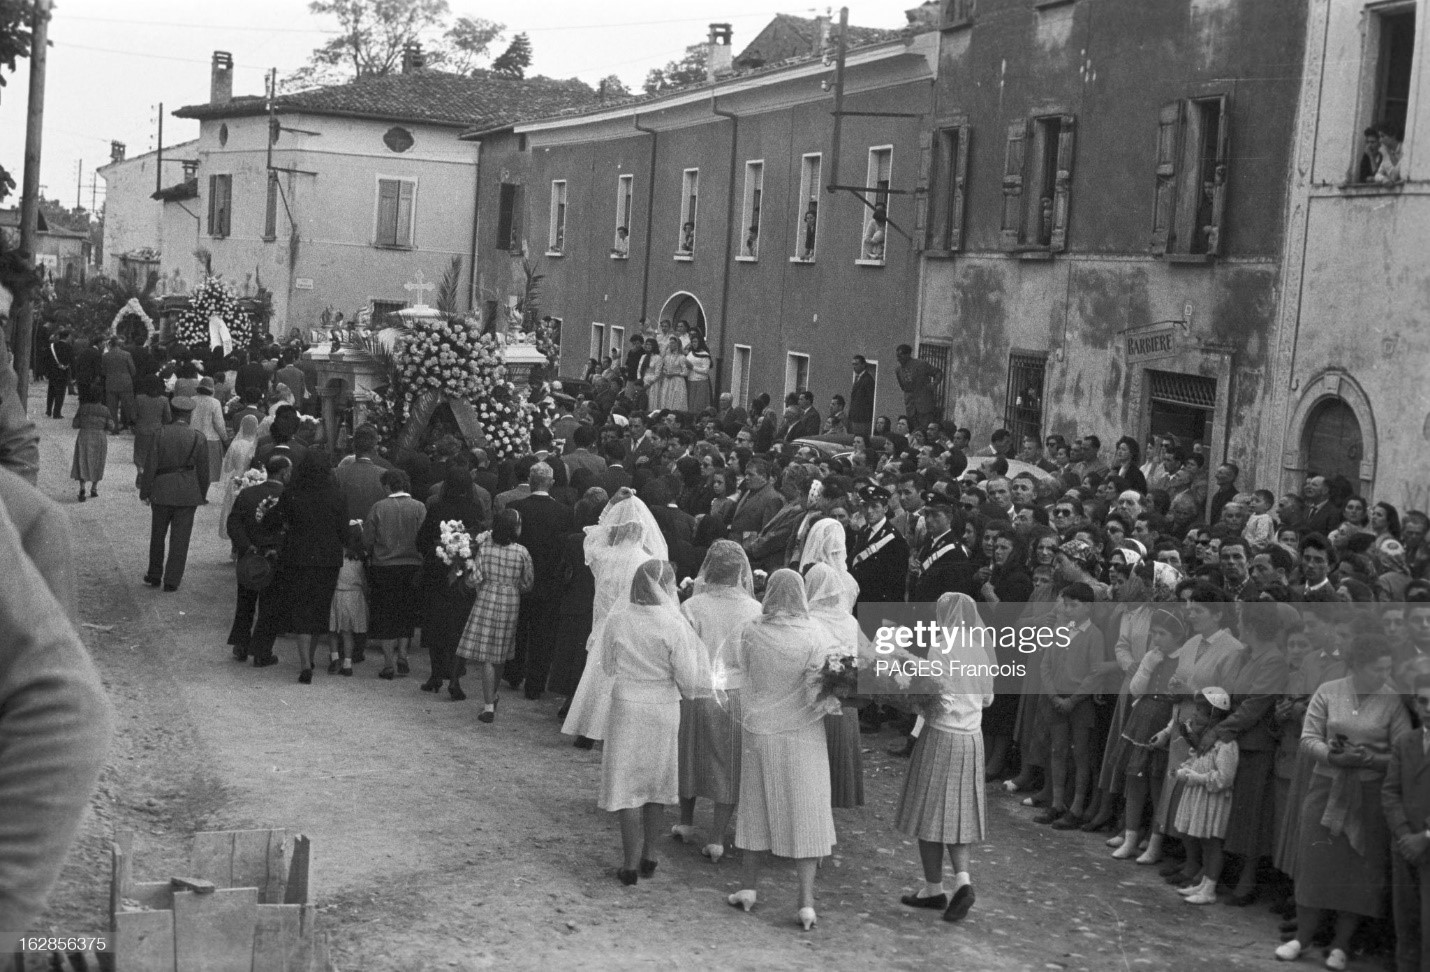 Funeral of marquis de Portago and the victims of his accident at the Thousand Miles race. Guidizzolo, Italy, May 14, 1957. Many people came to pay their last respects to the victims. 